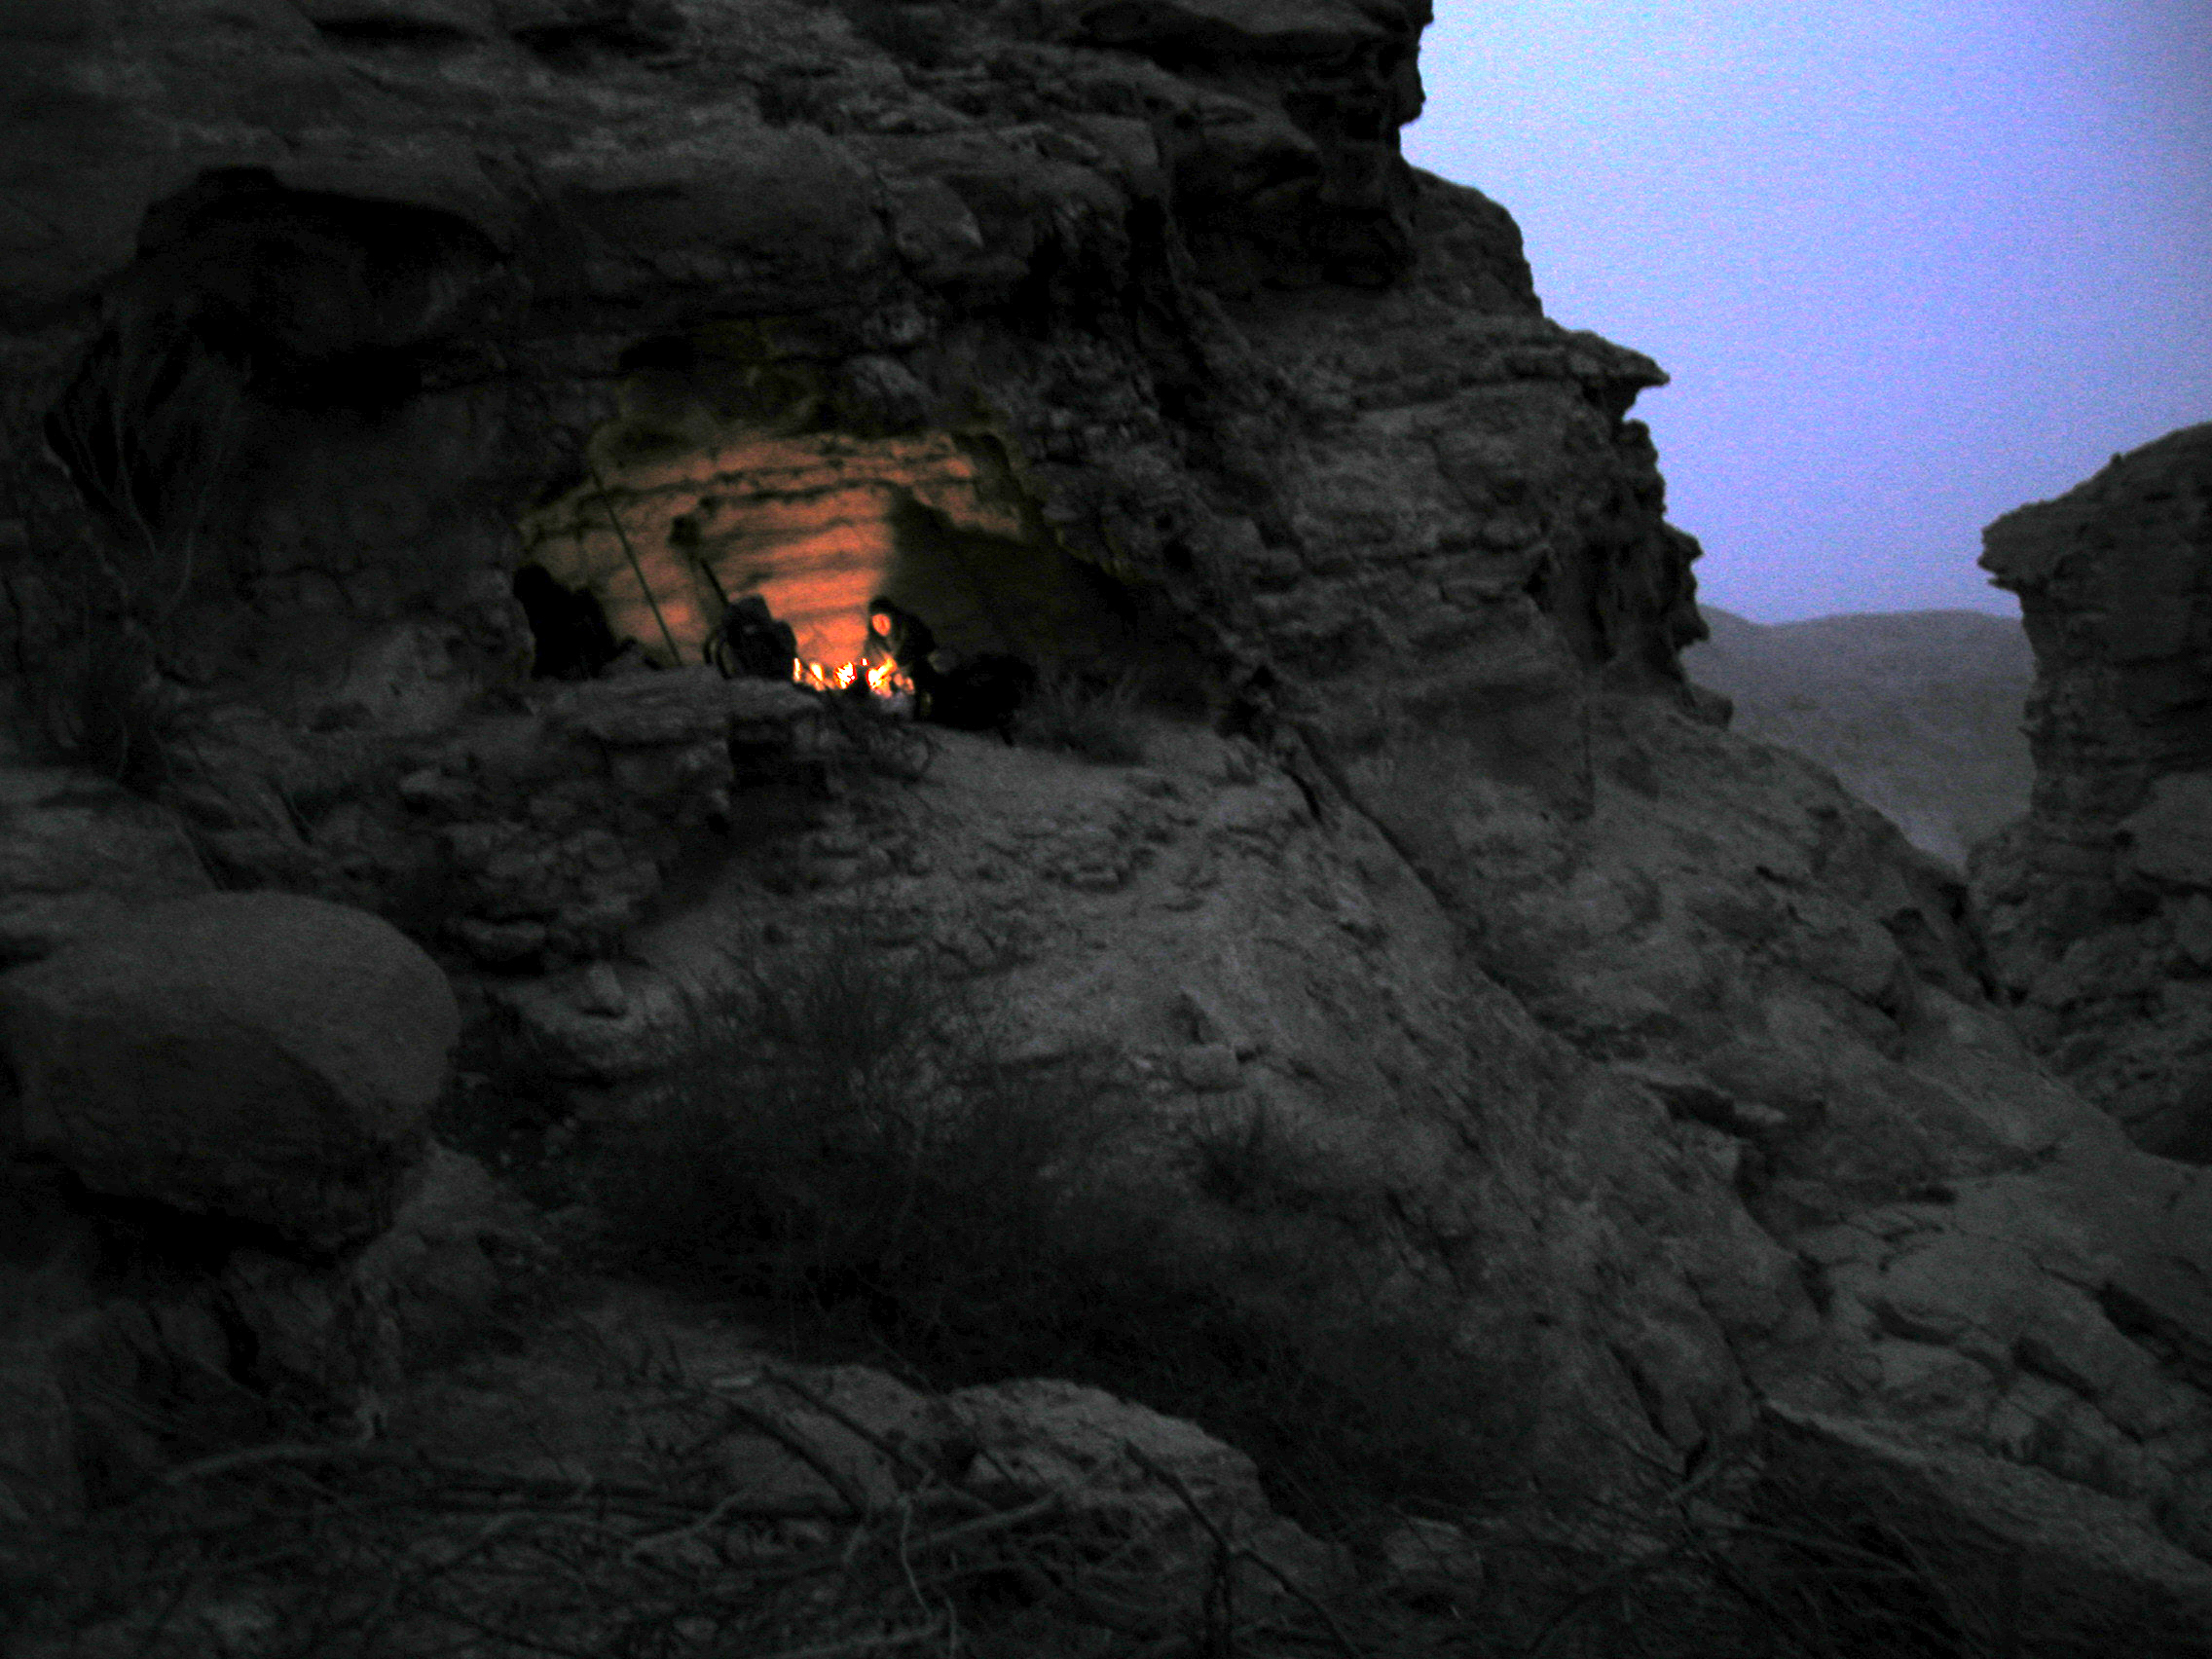 Night stop in a cave in the cliffs in AKBAN desert gathering